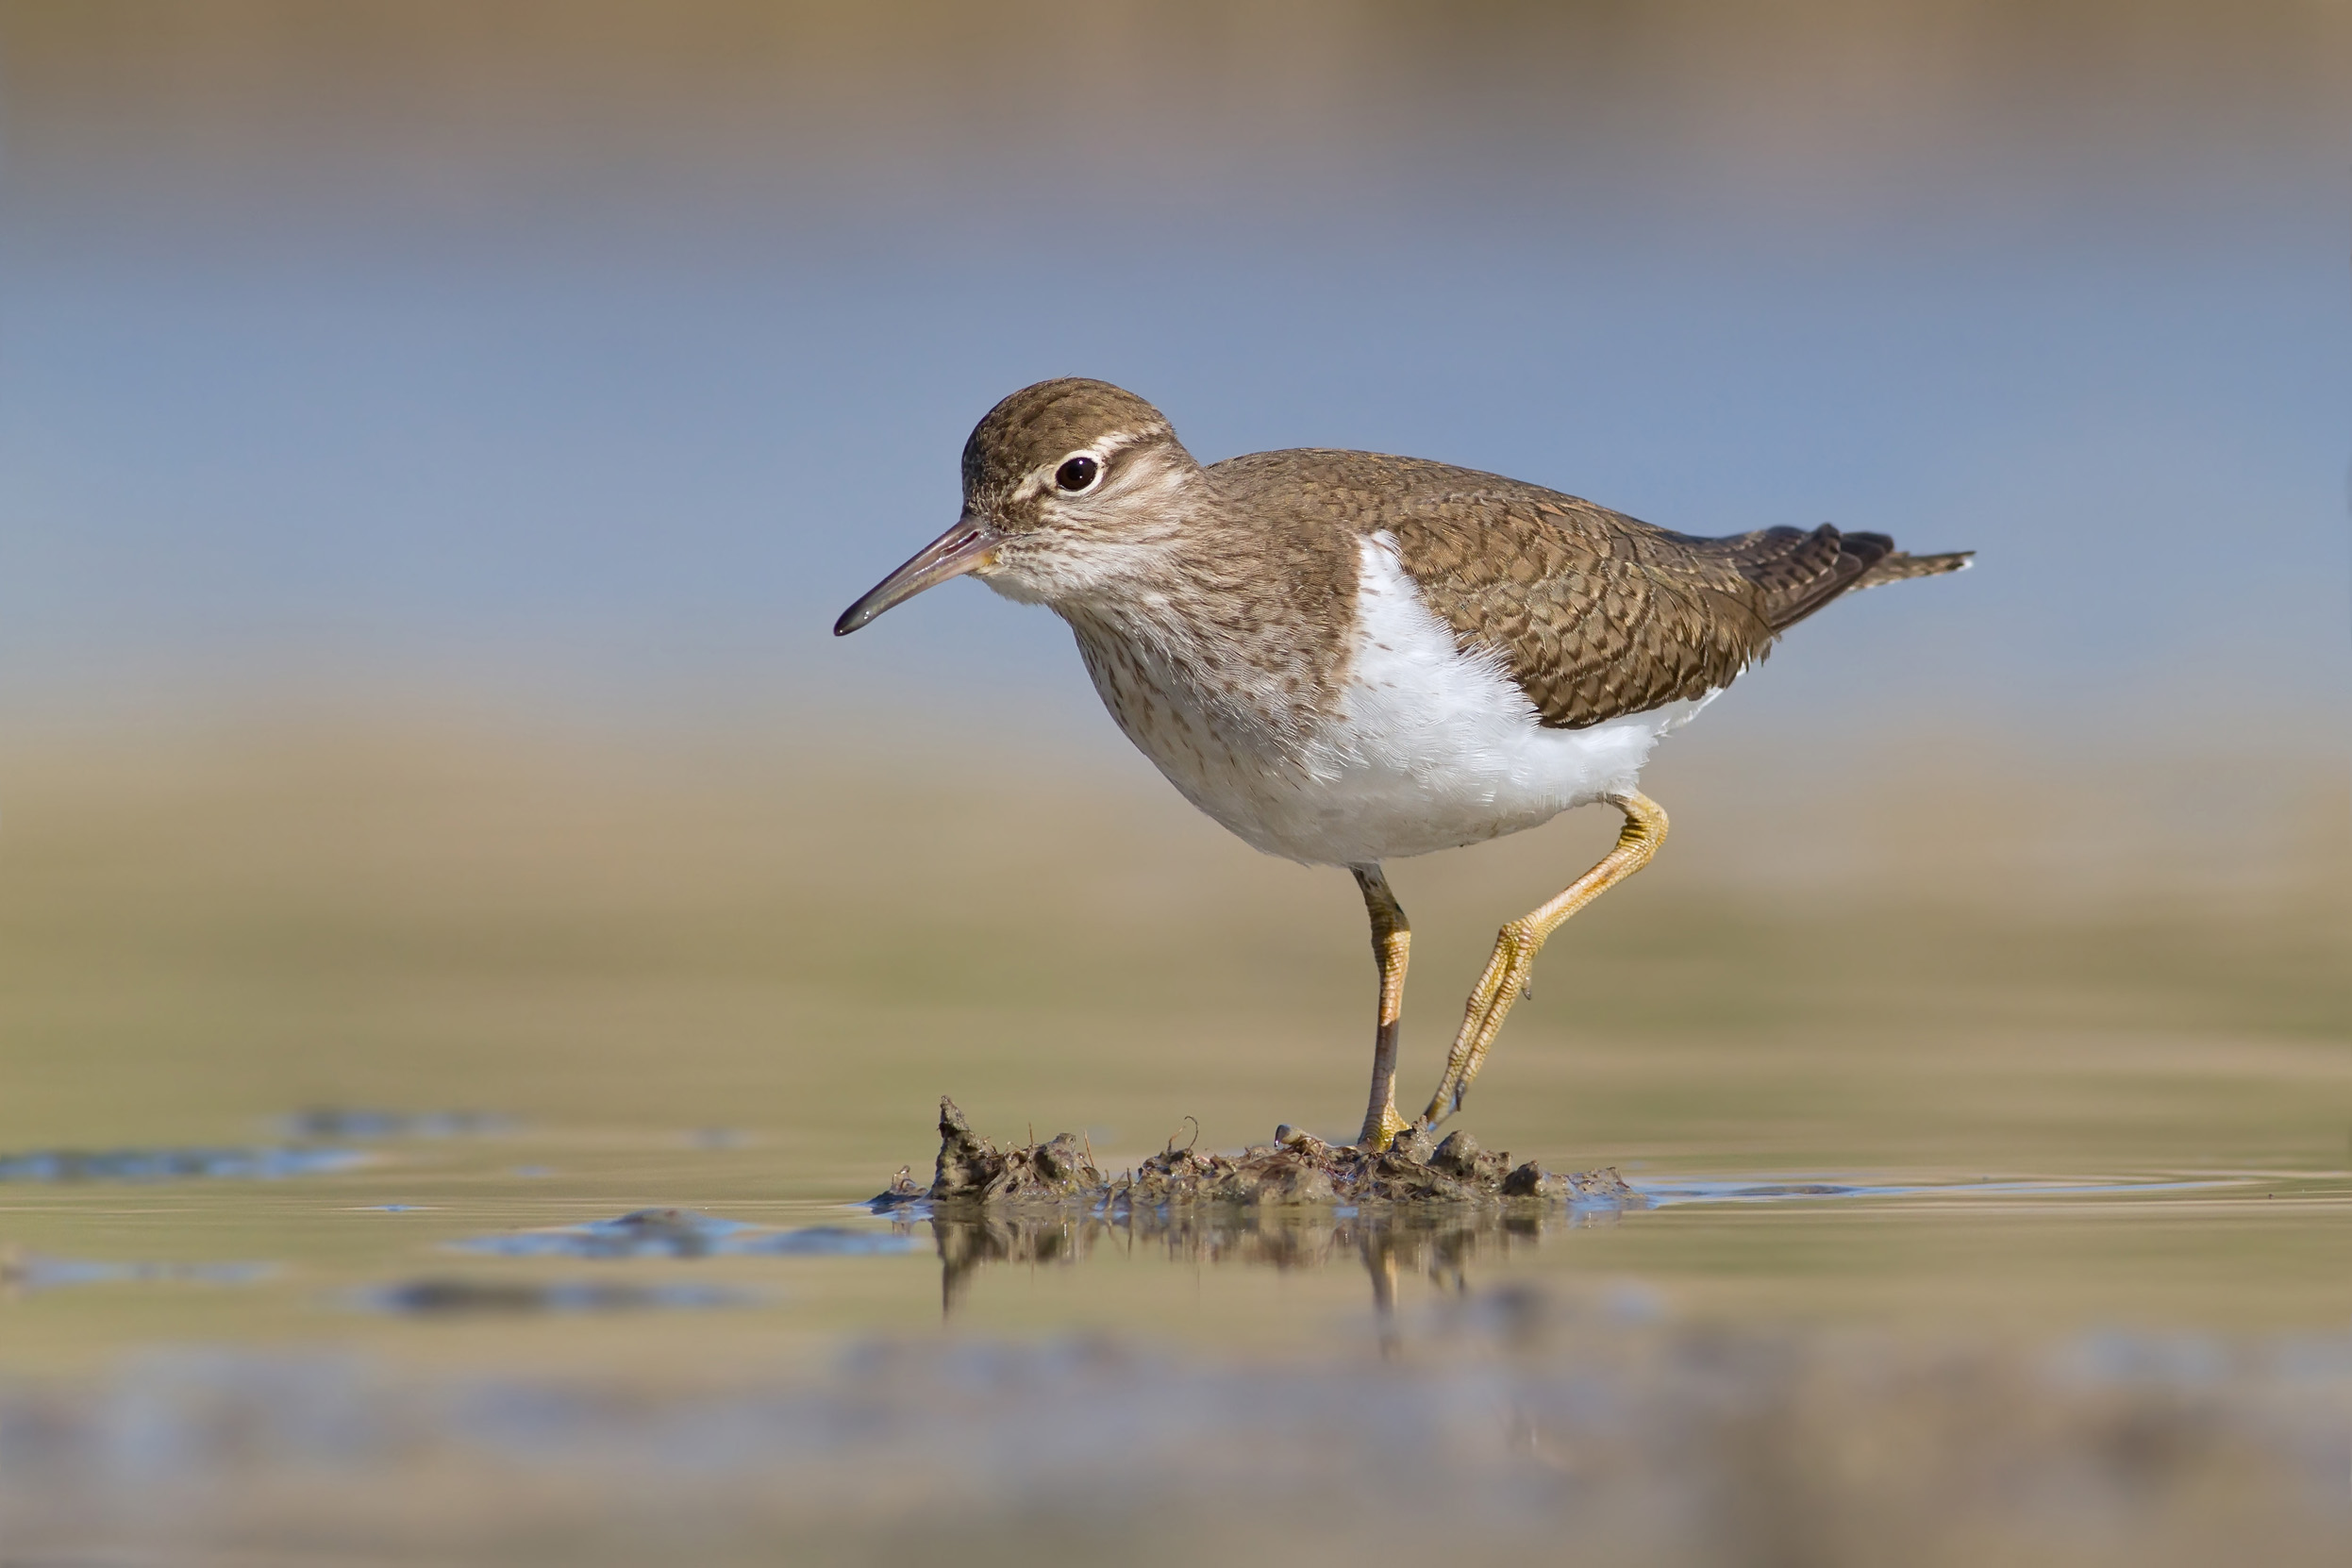 A Common Sandpiper wading through shallow waters.